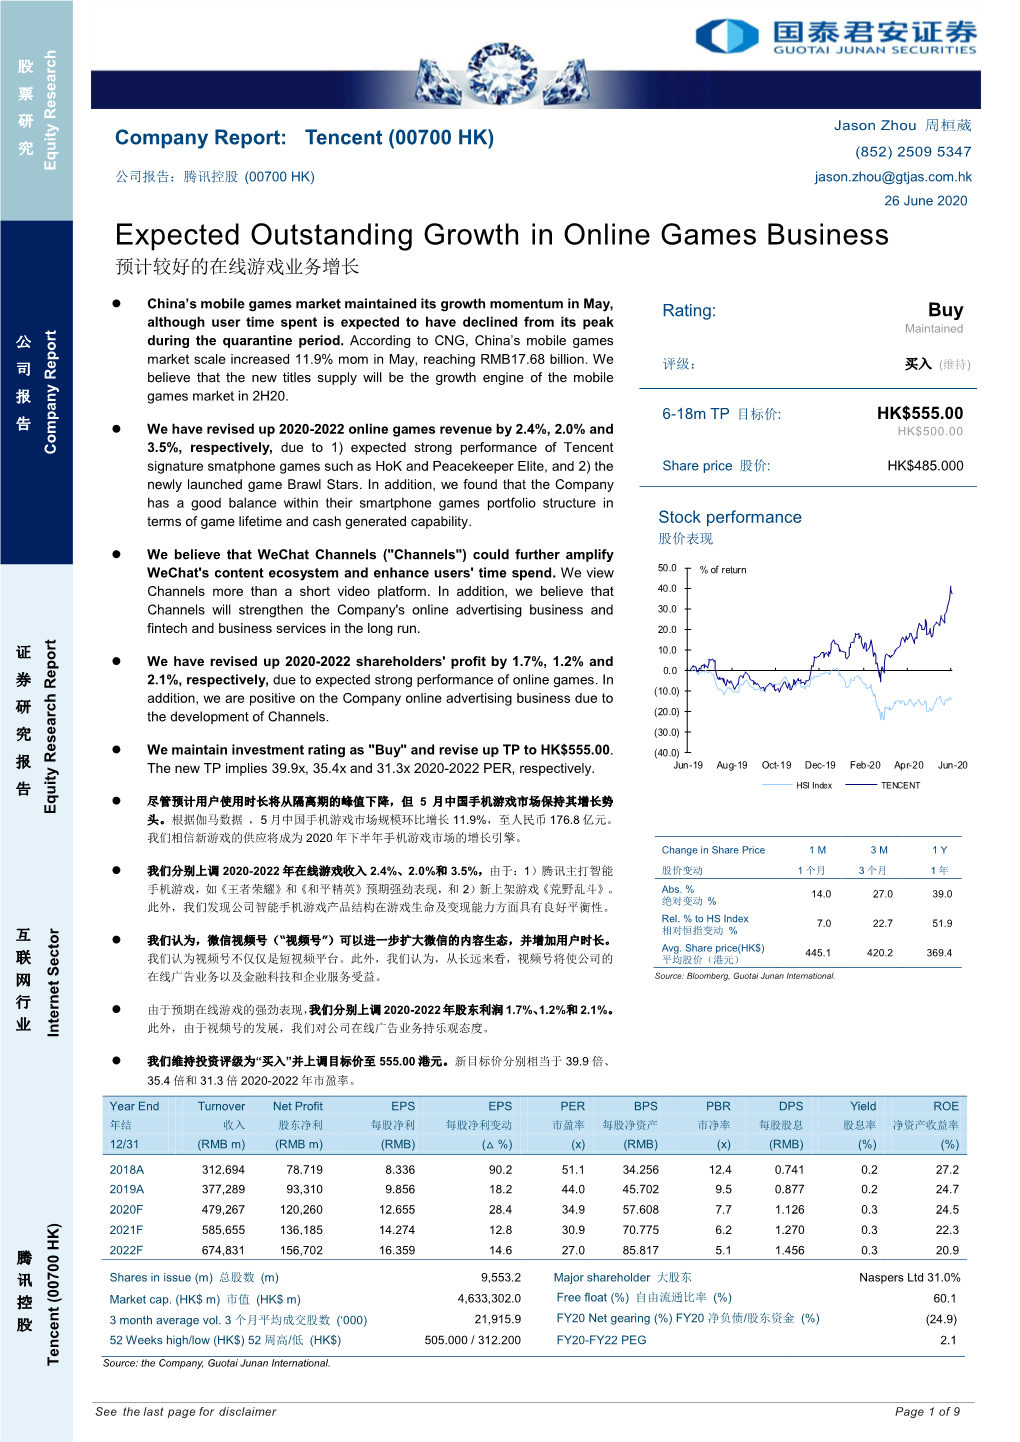 Expected Outstanding Growth in Online Games Business